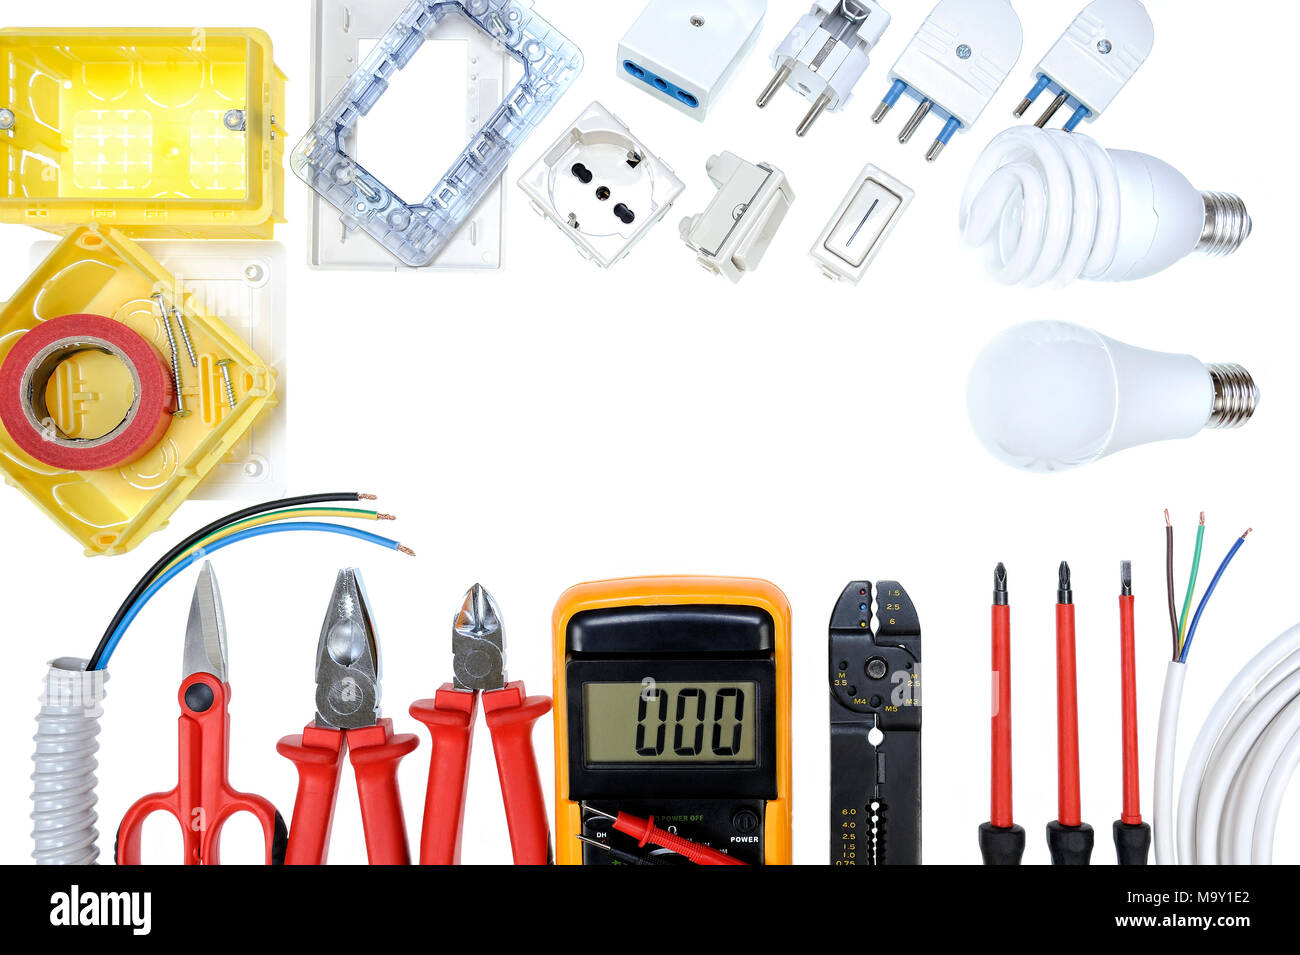 Premium Photo  Working tools, light bulb and components. electrical objects